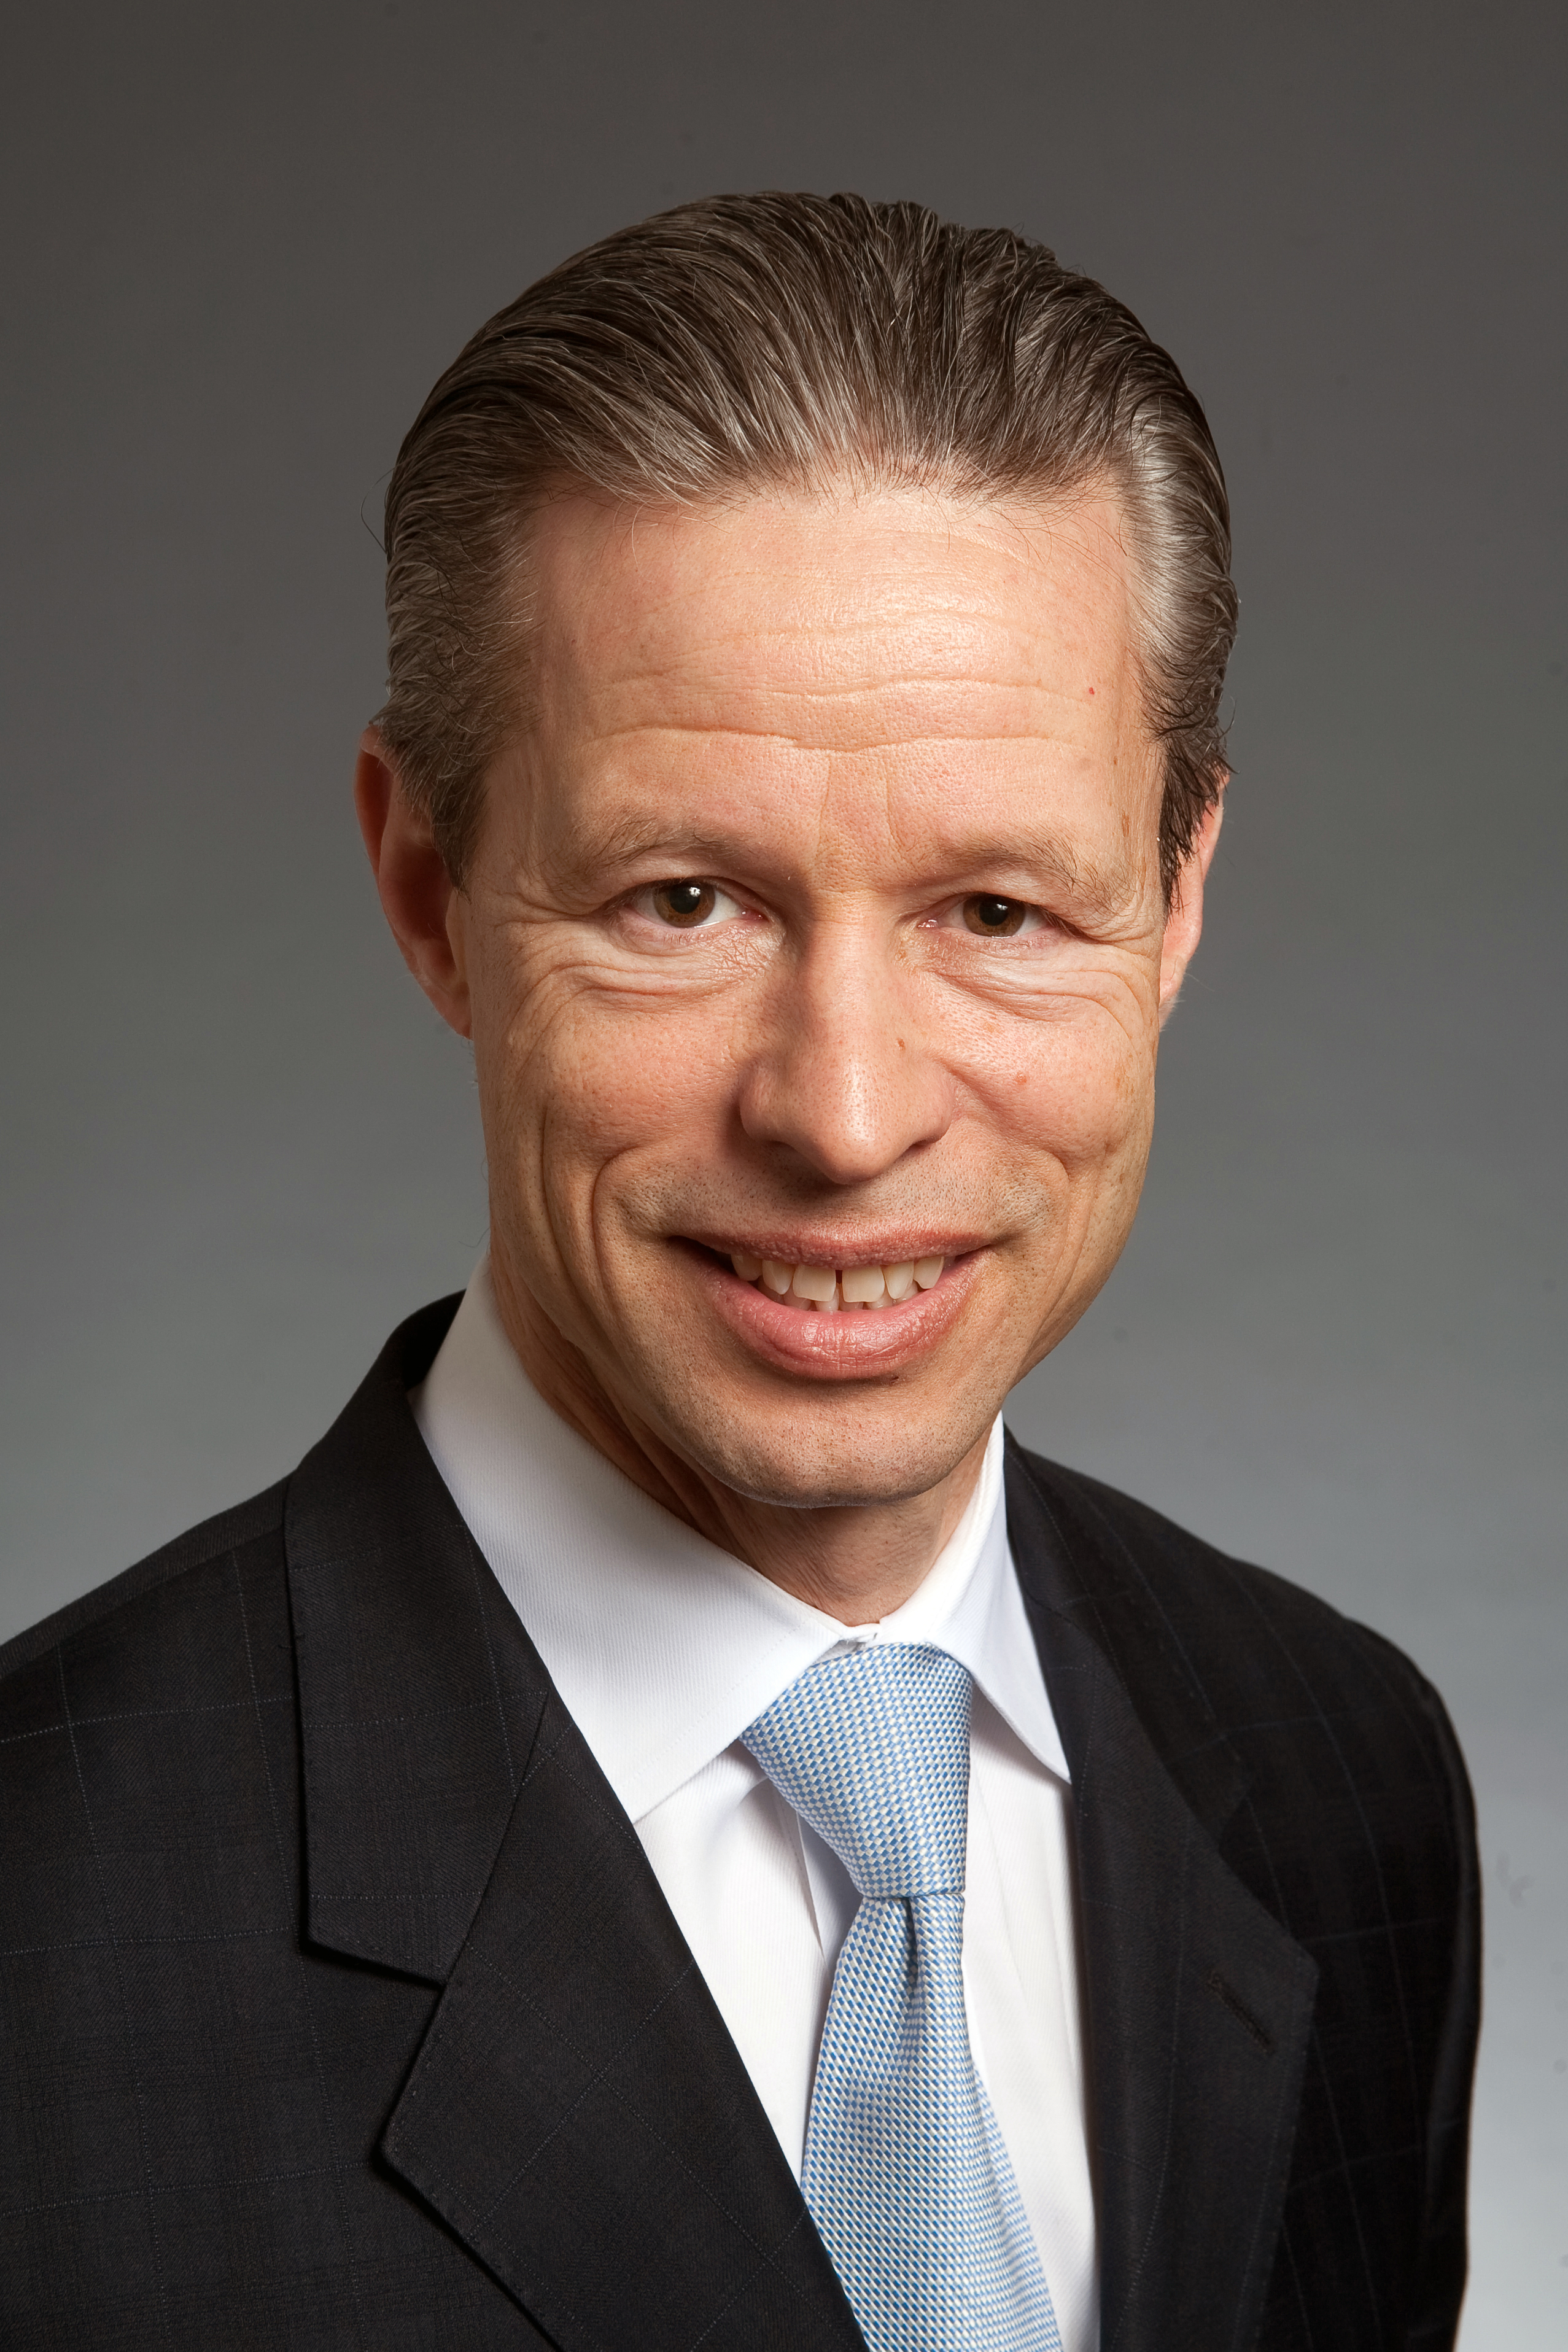 Kurt Pfotenhauer, Vice Chairman at First American Financial Corporation, has been appointed board chairman of MISMO